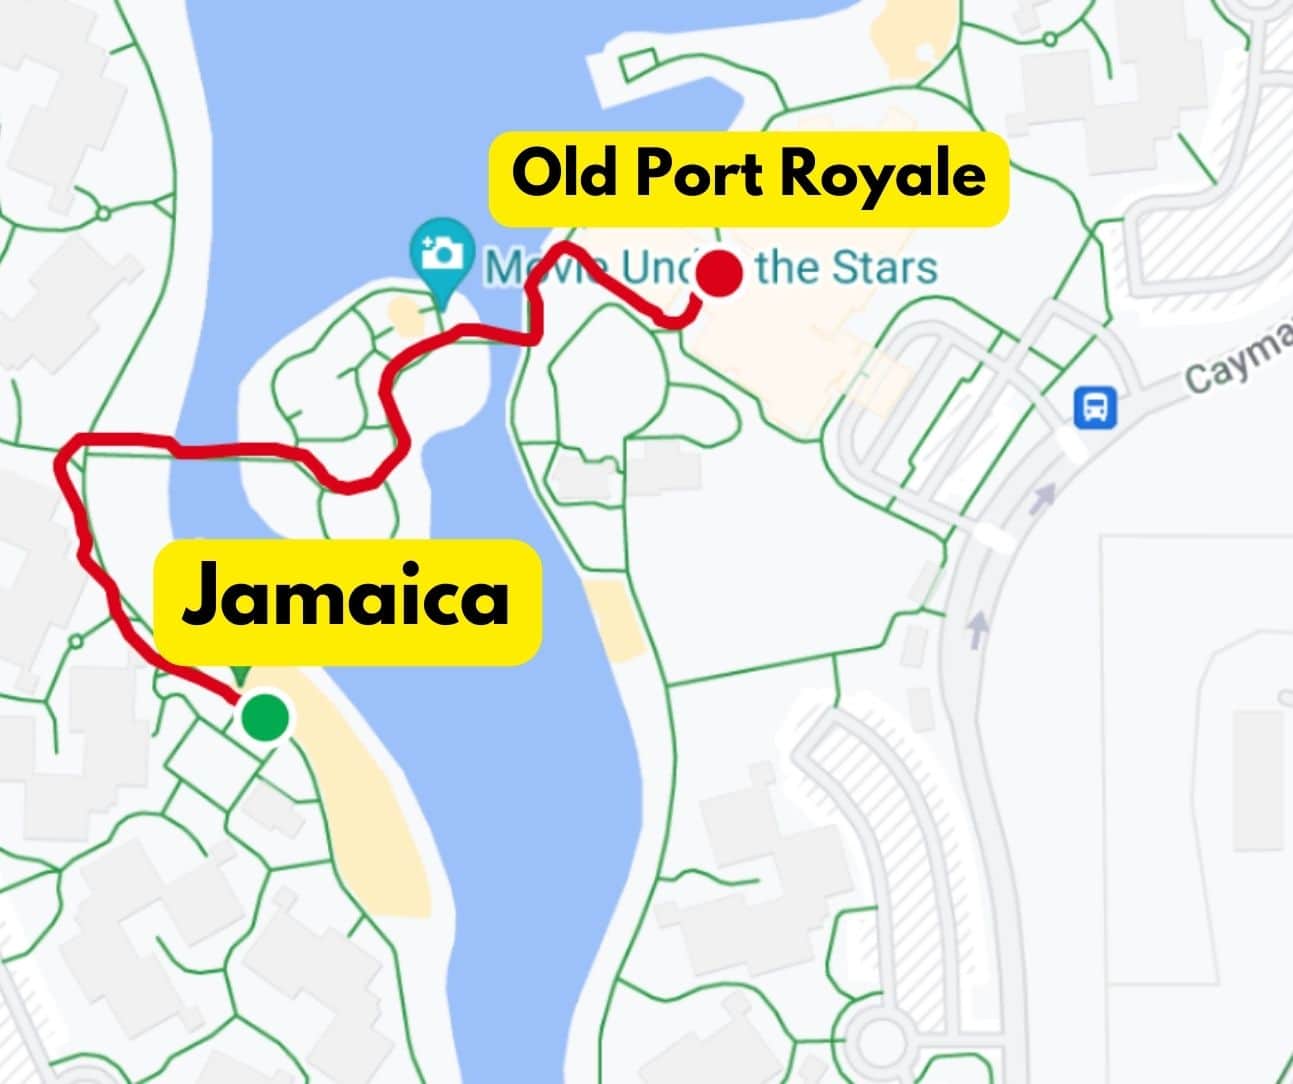 walking distance from Jamaica to Old Port Royale